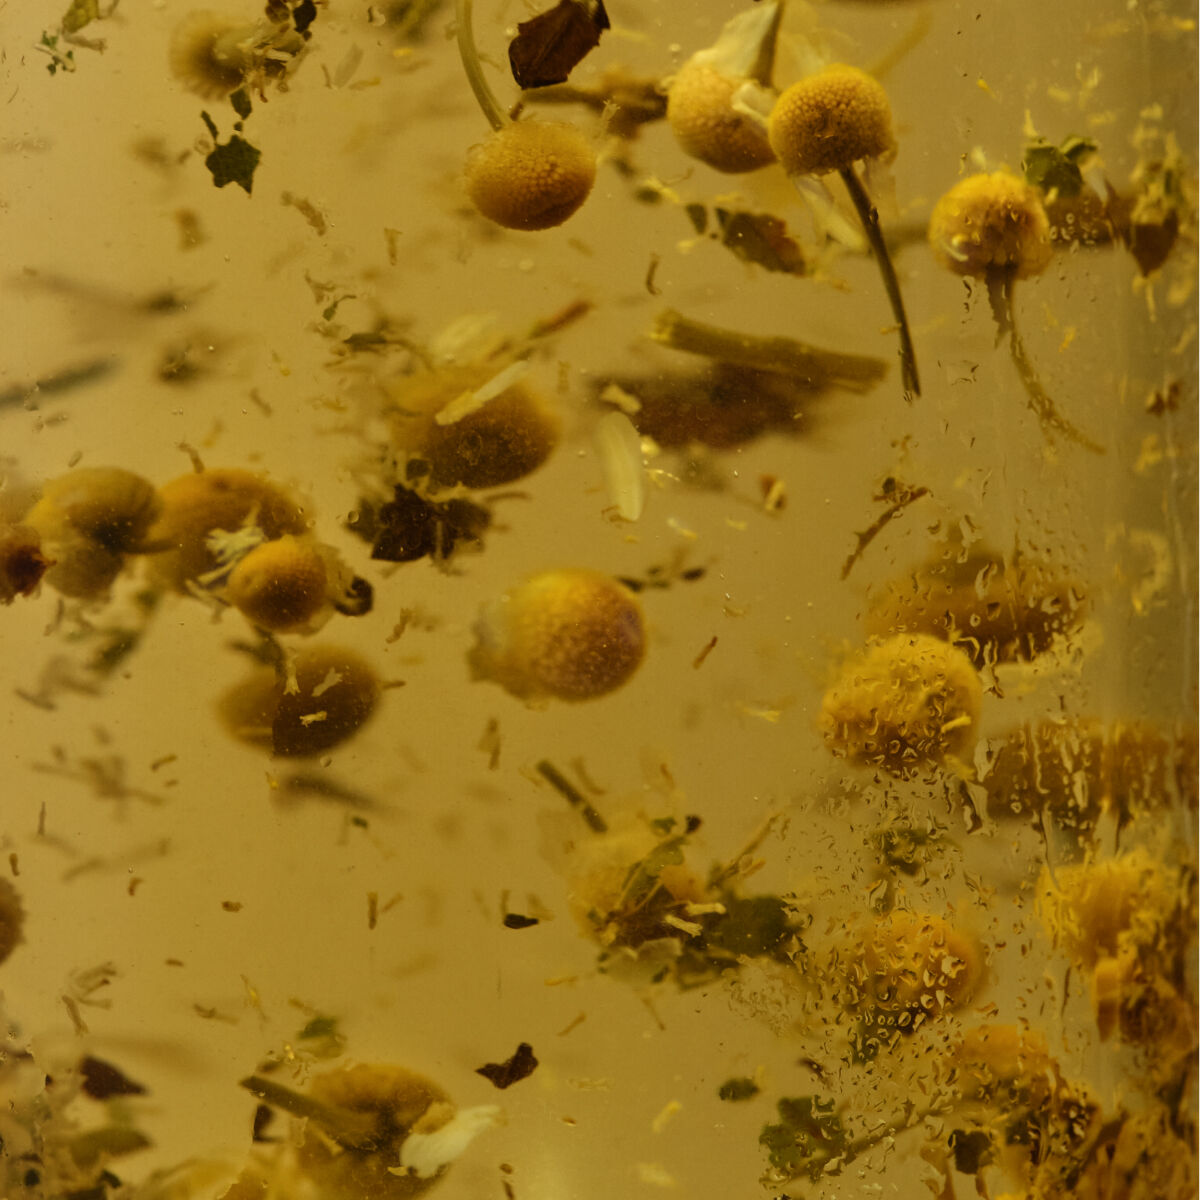 camomile flowers floating around in hot water